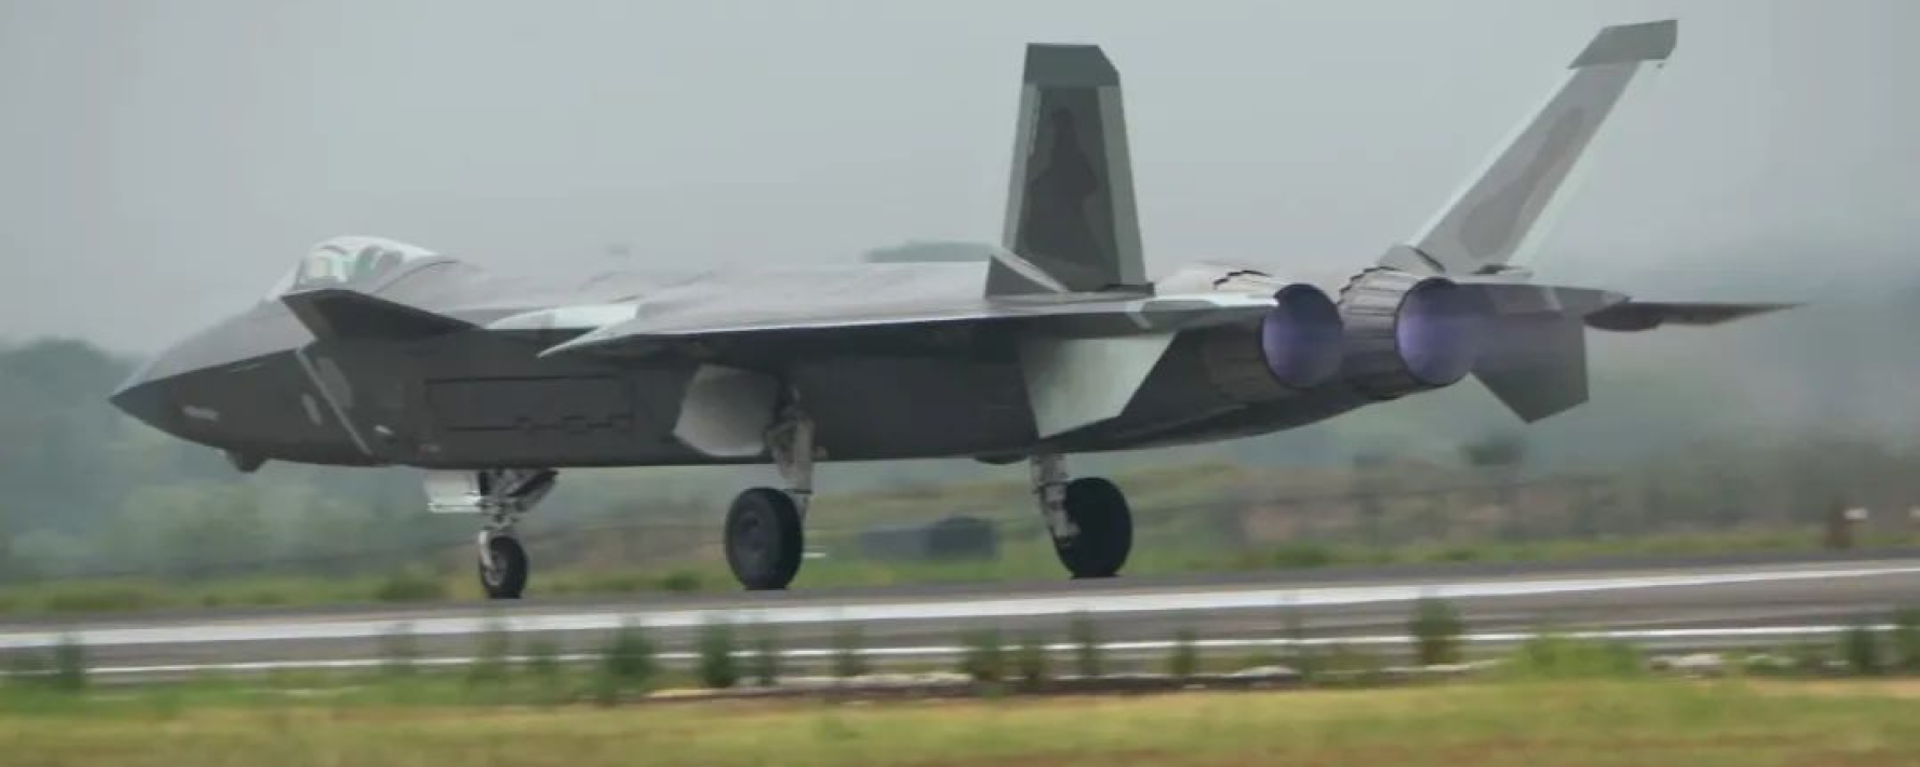 A J-20 stealth fighter of China's People's Liberation Army Air Force (PLAAF) takes part in drills near Taiwan on August 3, 2022. - Sputnik International, 1920, 13.03.2023